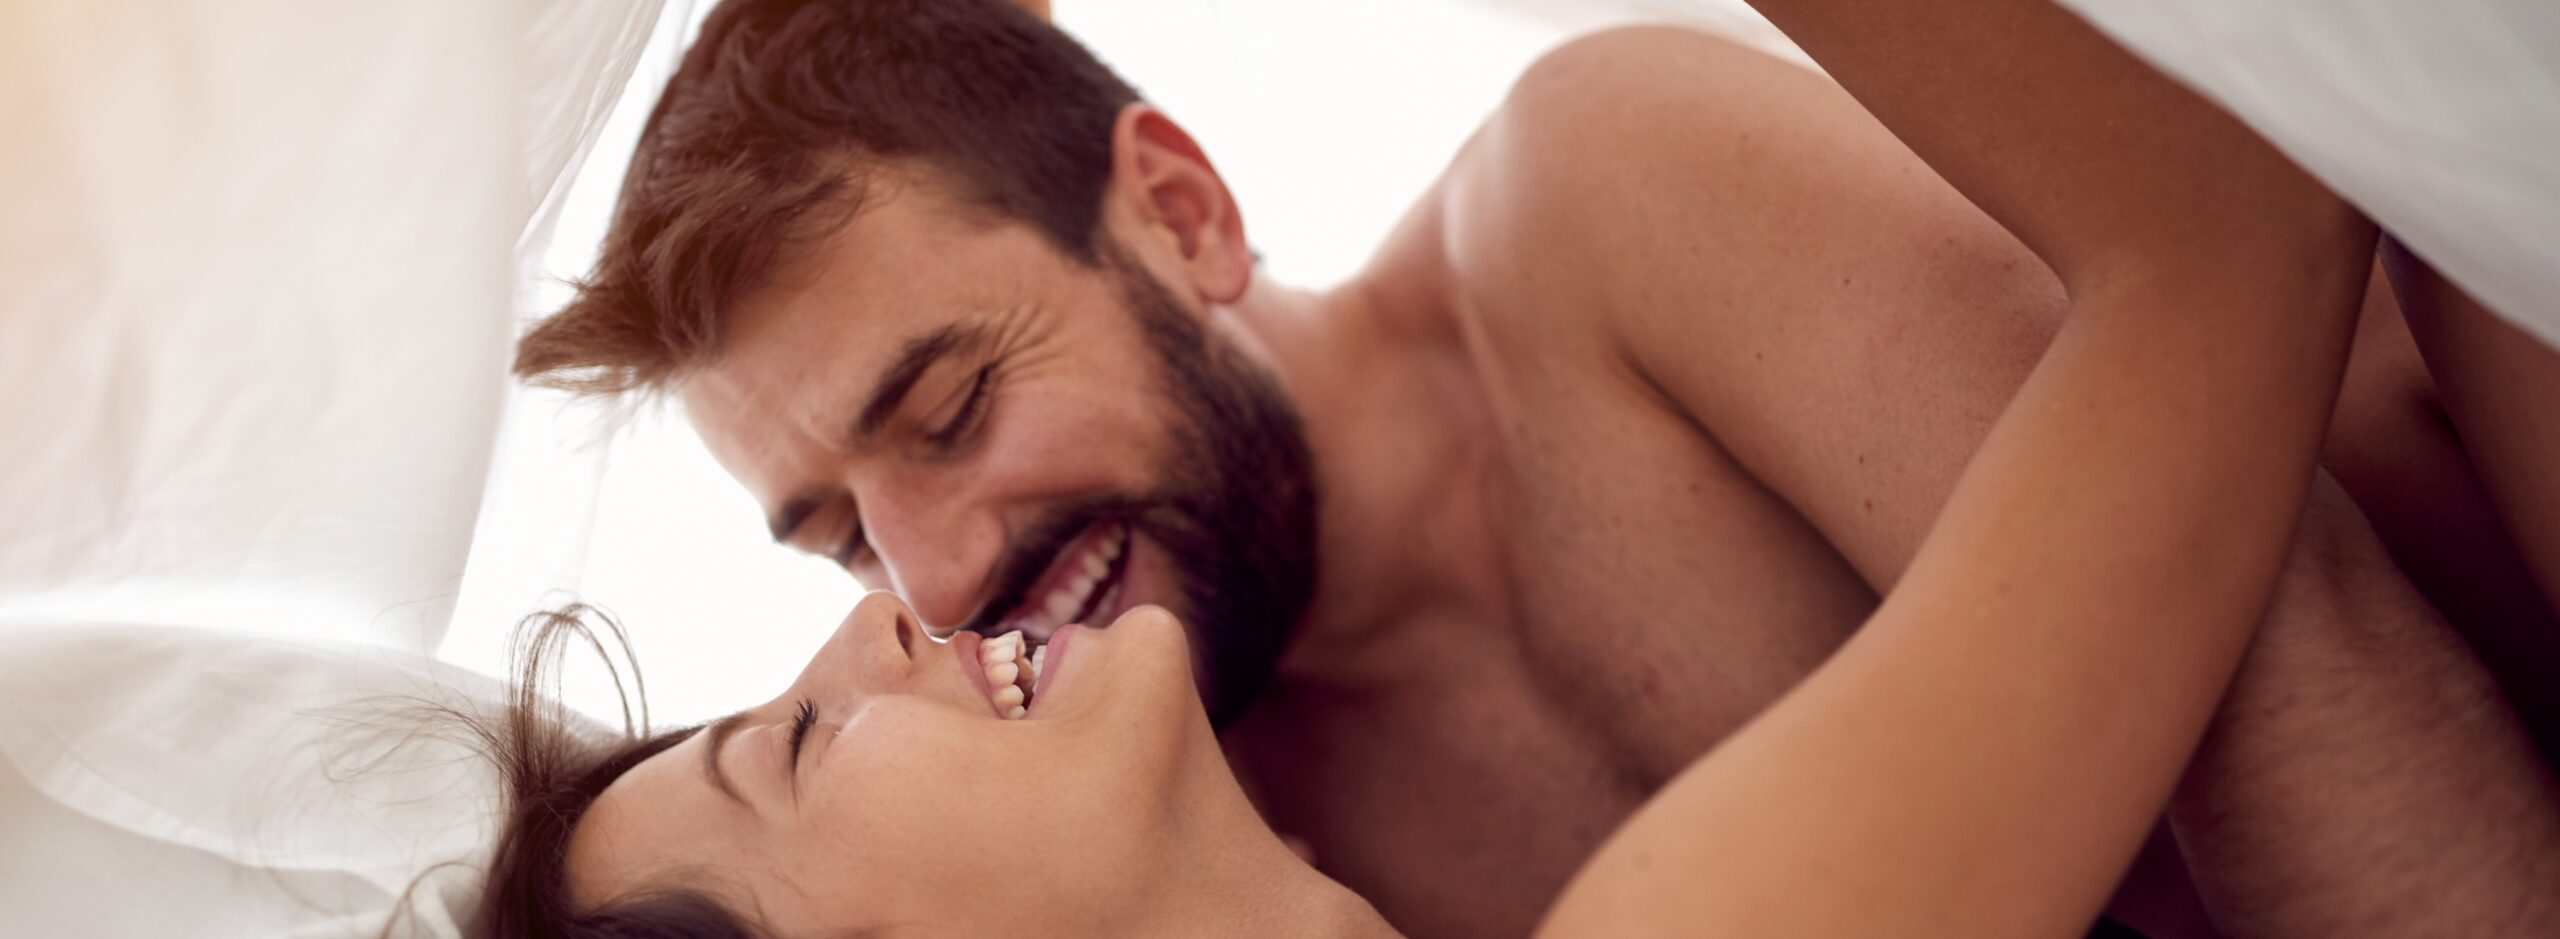 man and woman lying in bed together laughing